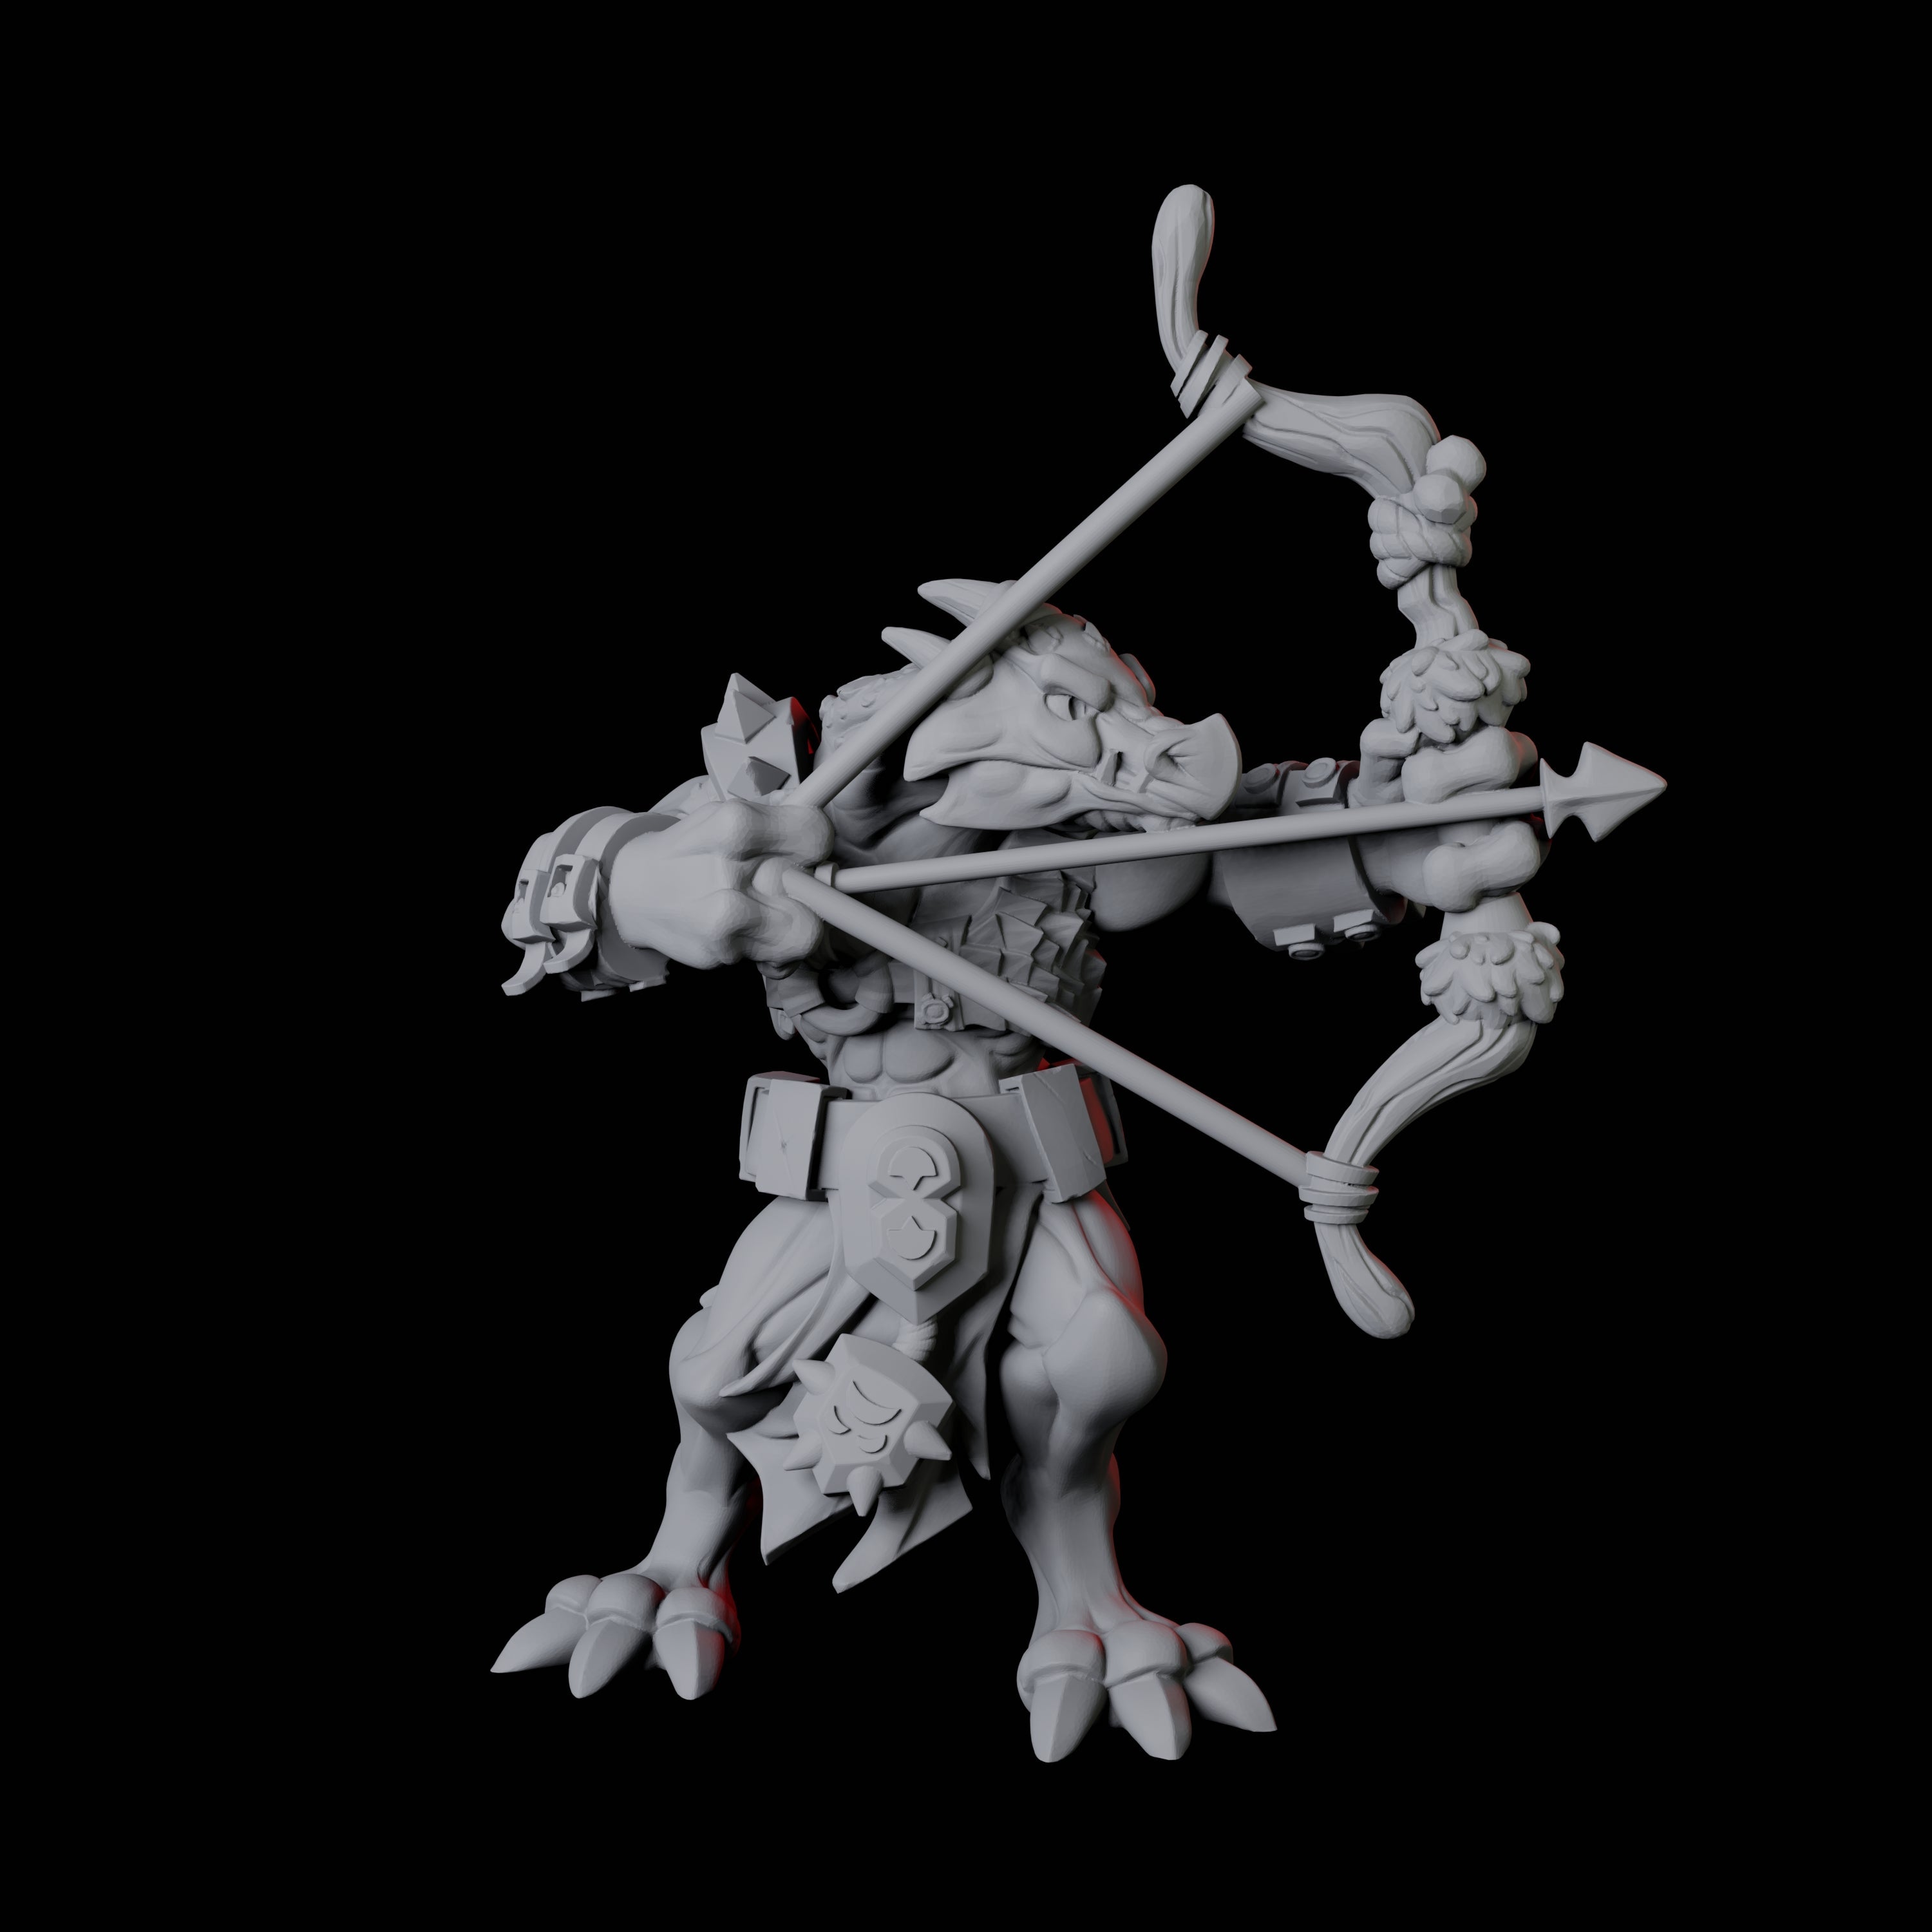 Kobold Ranger A Miniature for Dungeons and Dragons, Pathfinder or other TTRPGs